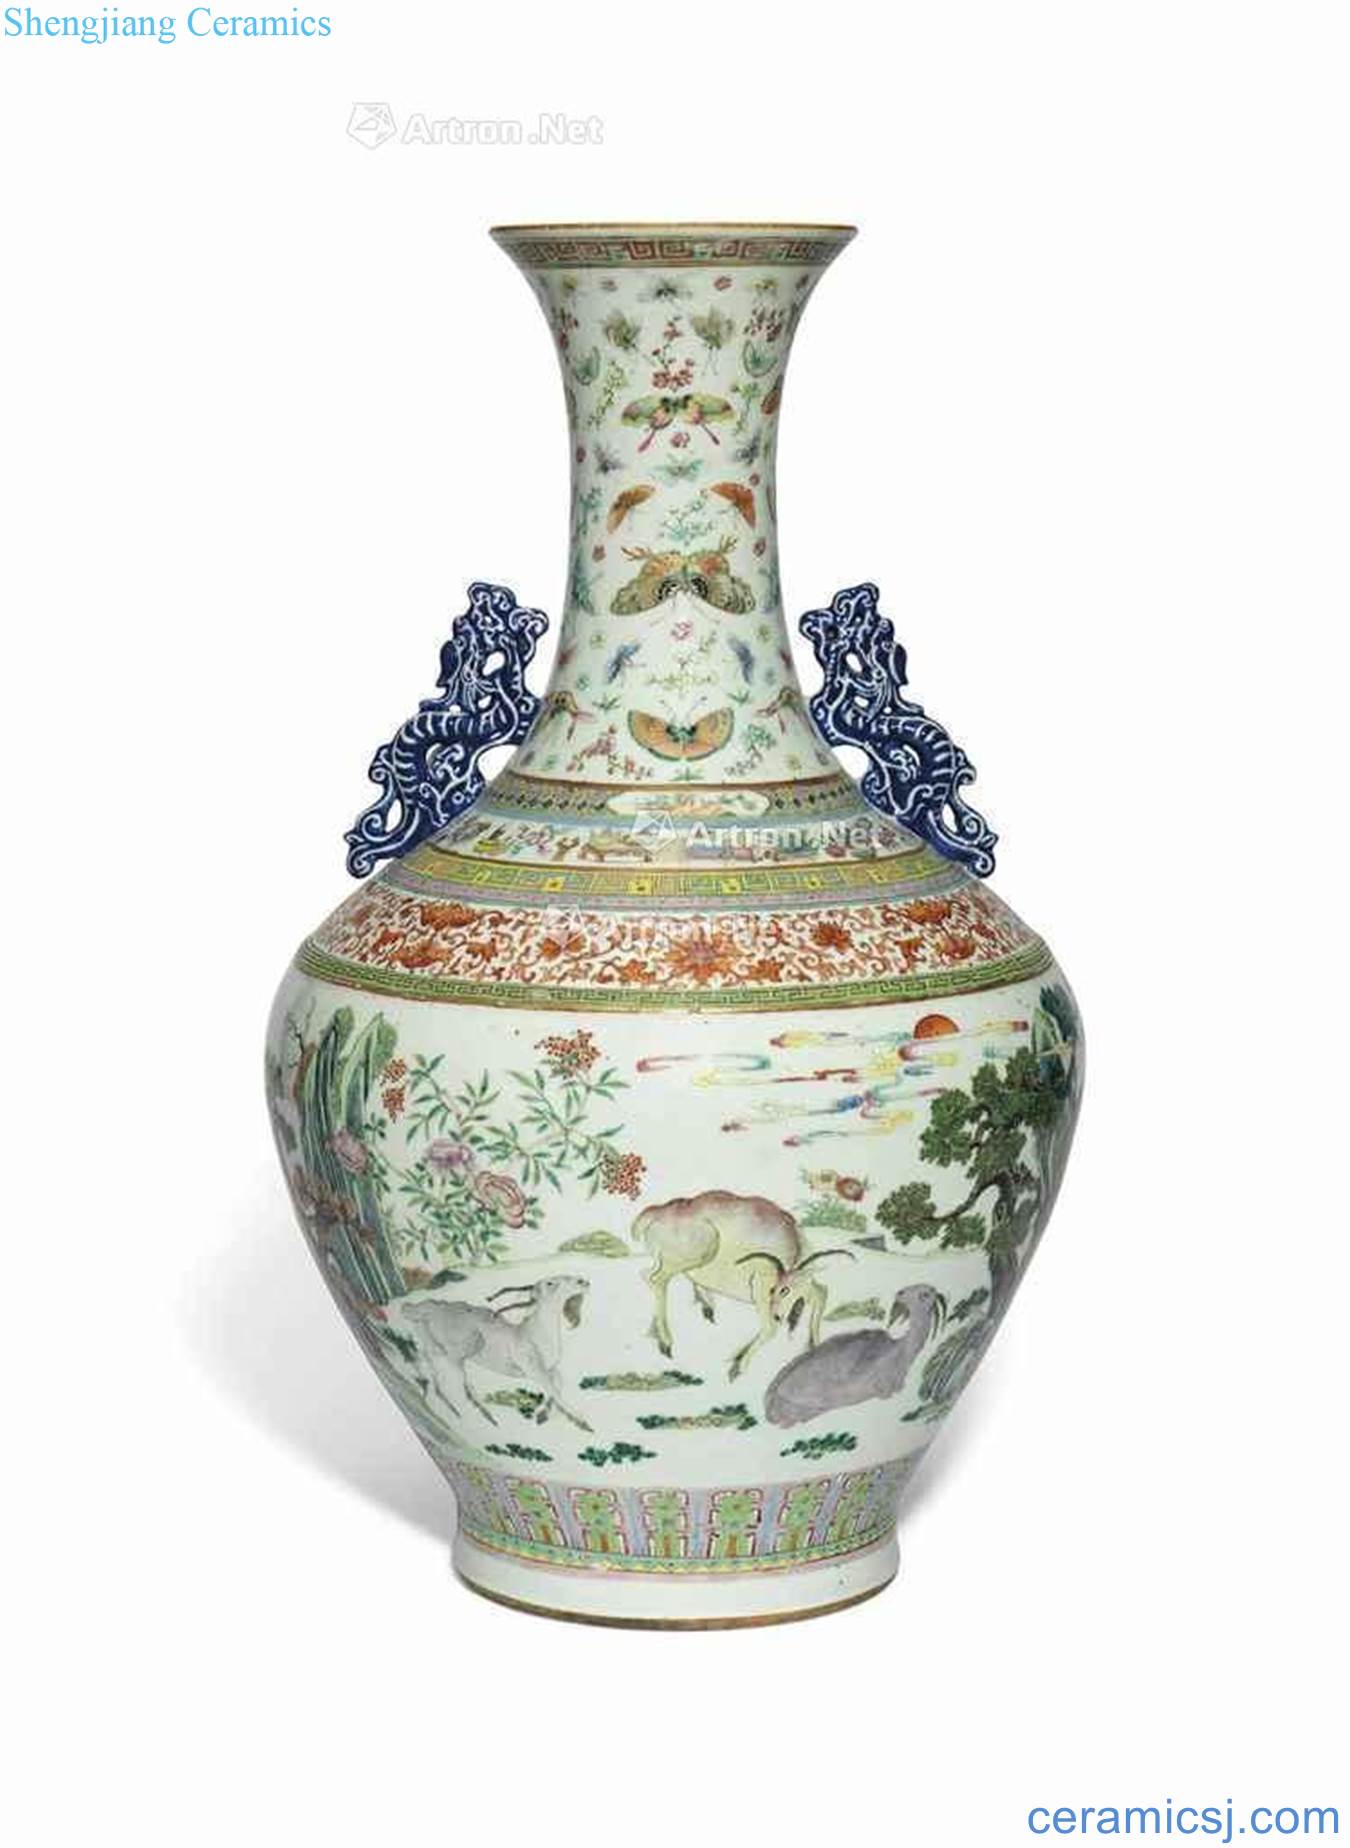 In the 19th century A LARGE FAMILLE ROSE 'RAMS' VASE